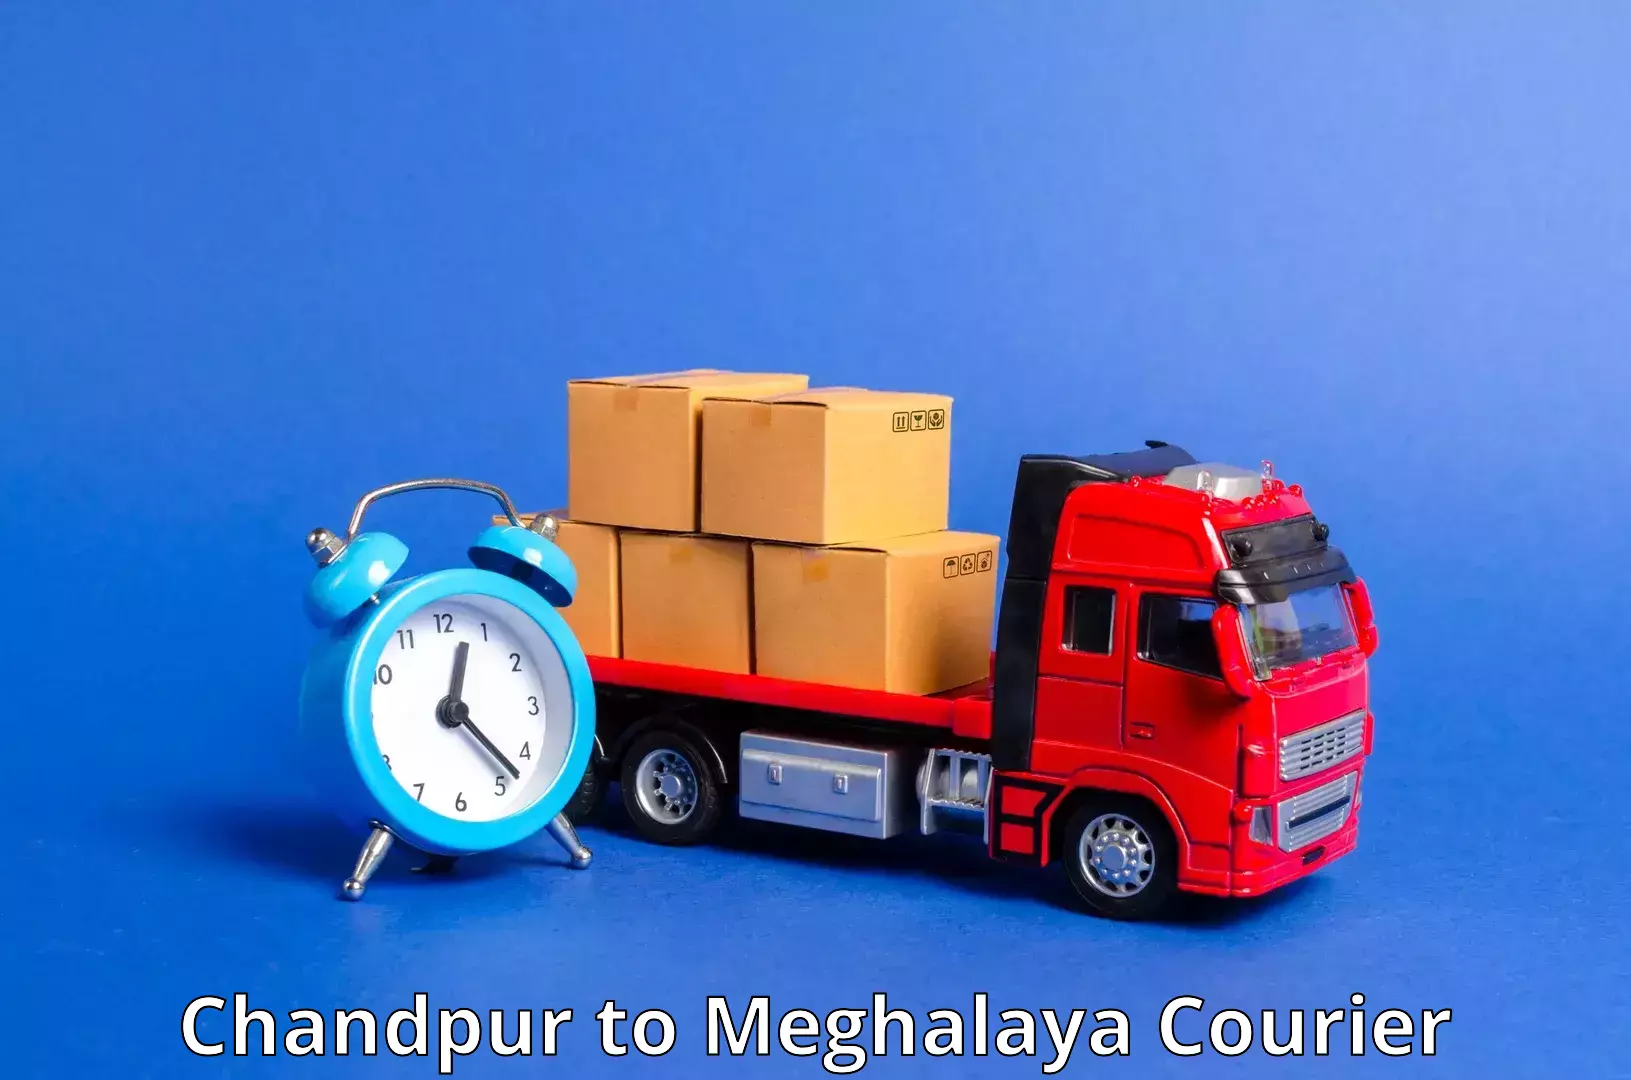 High-speed parcel service Chandpur to Nongstoin